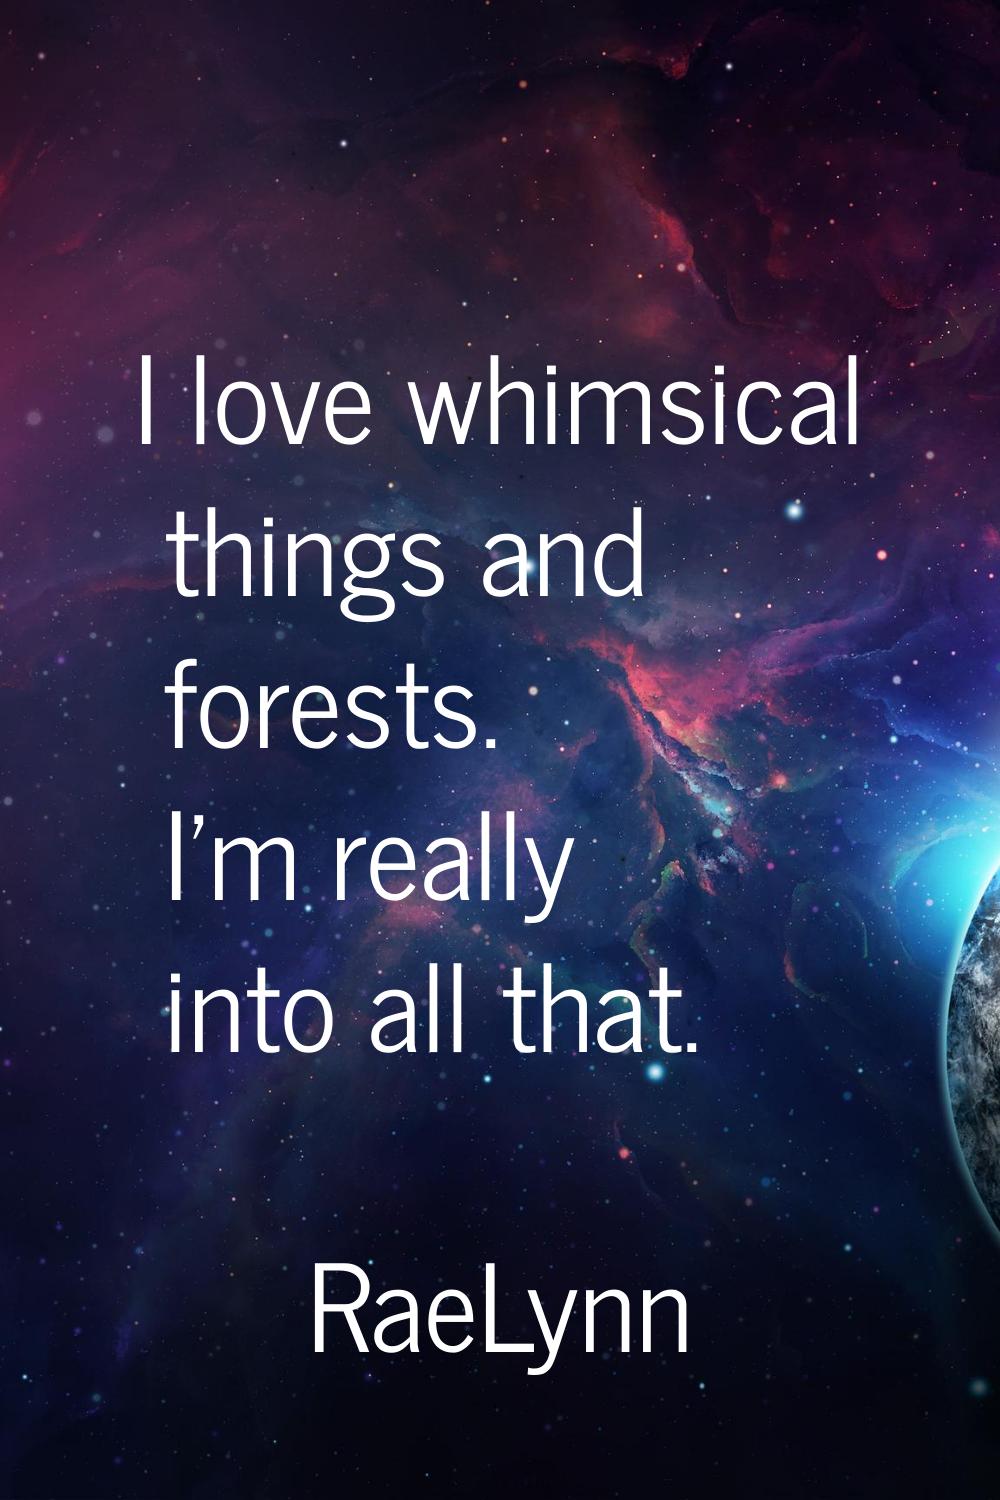 I love whimsical things and forests. I'm really into all that.